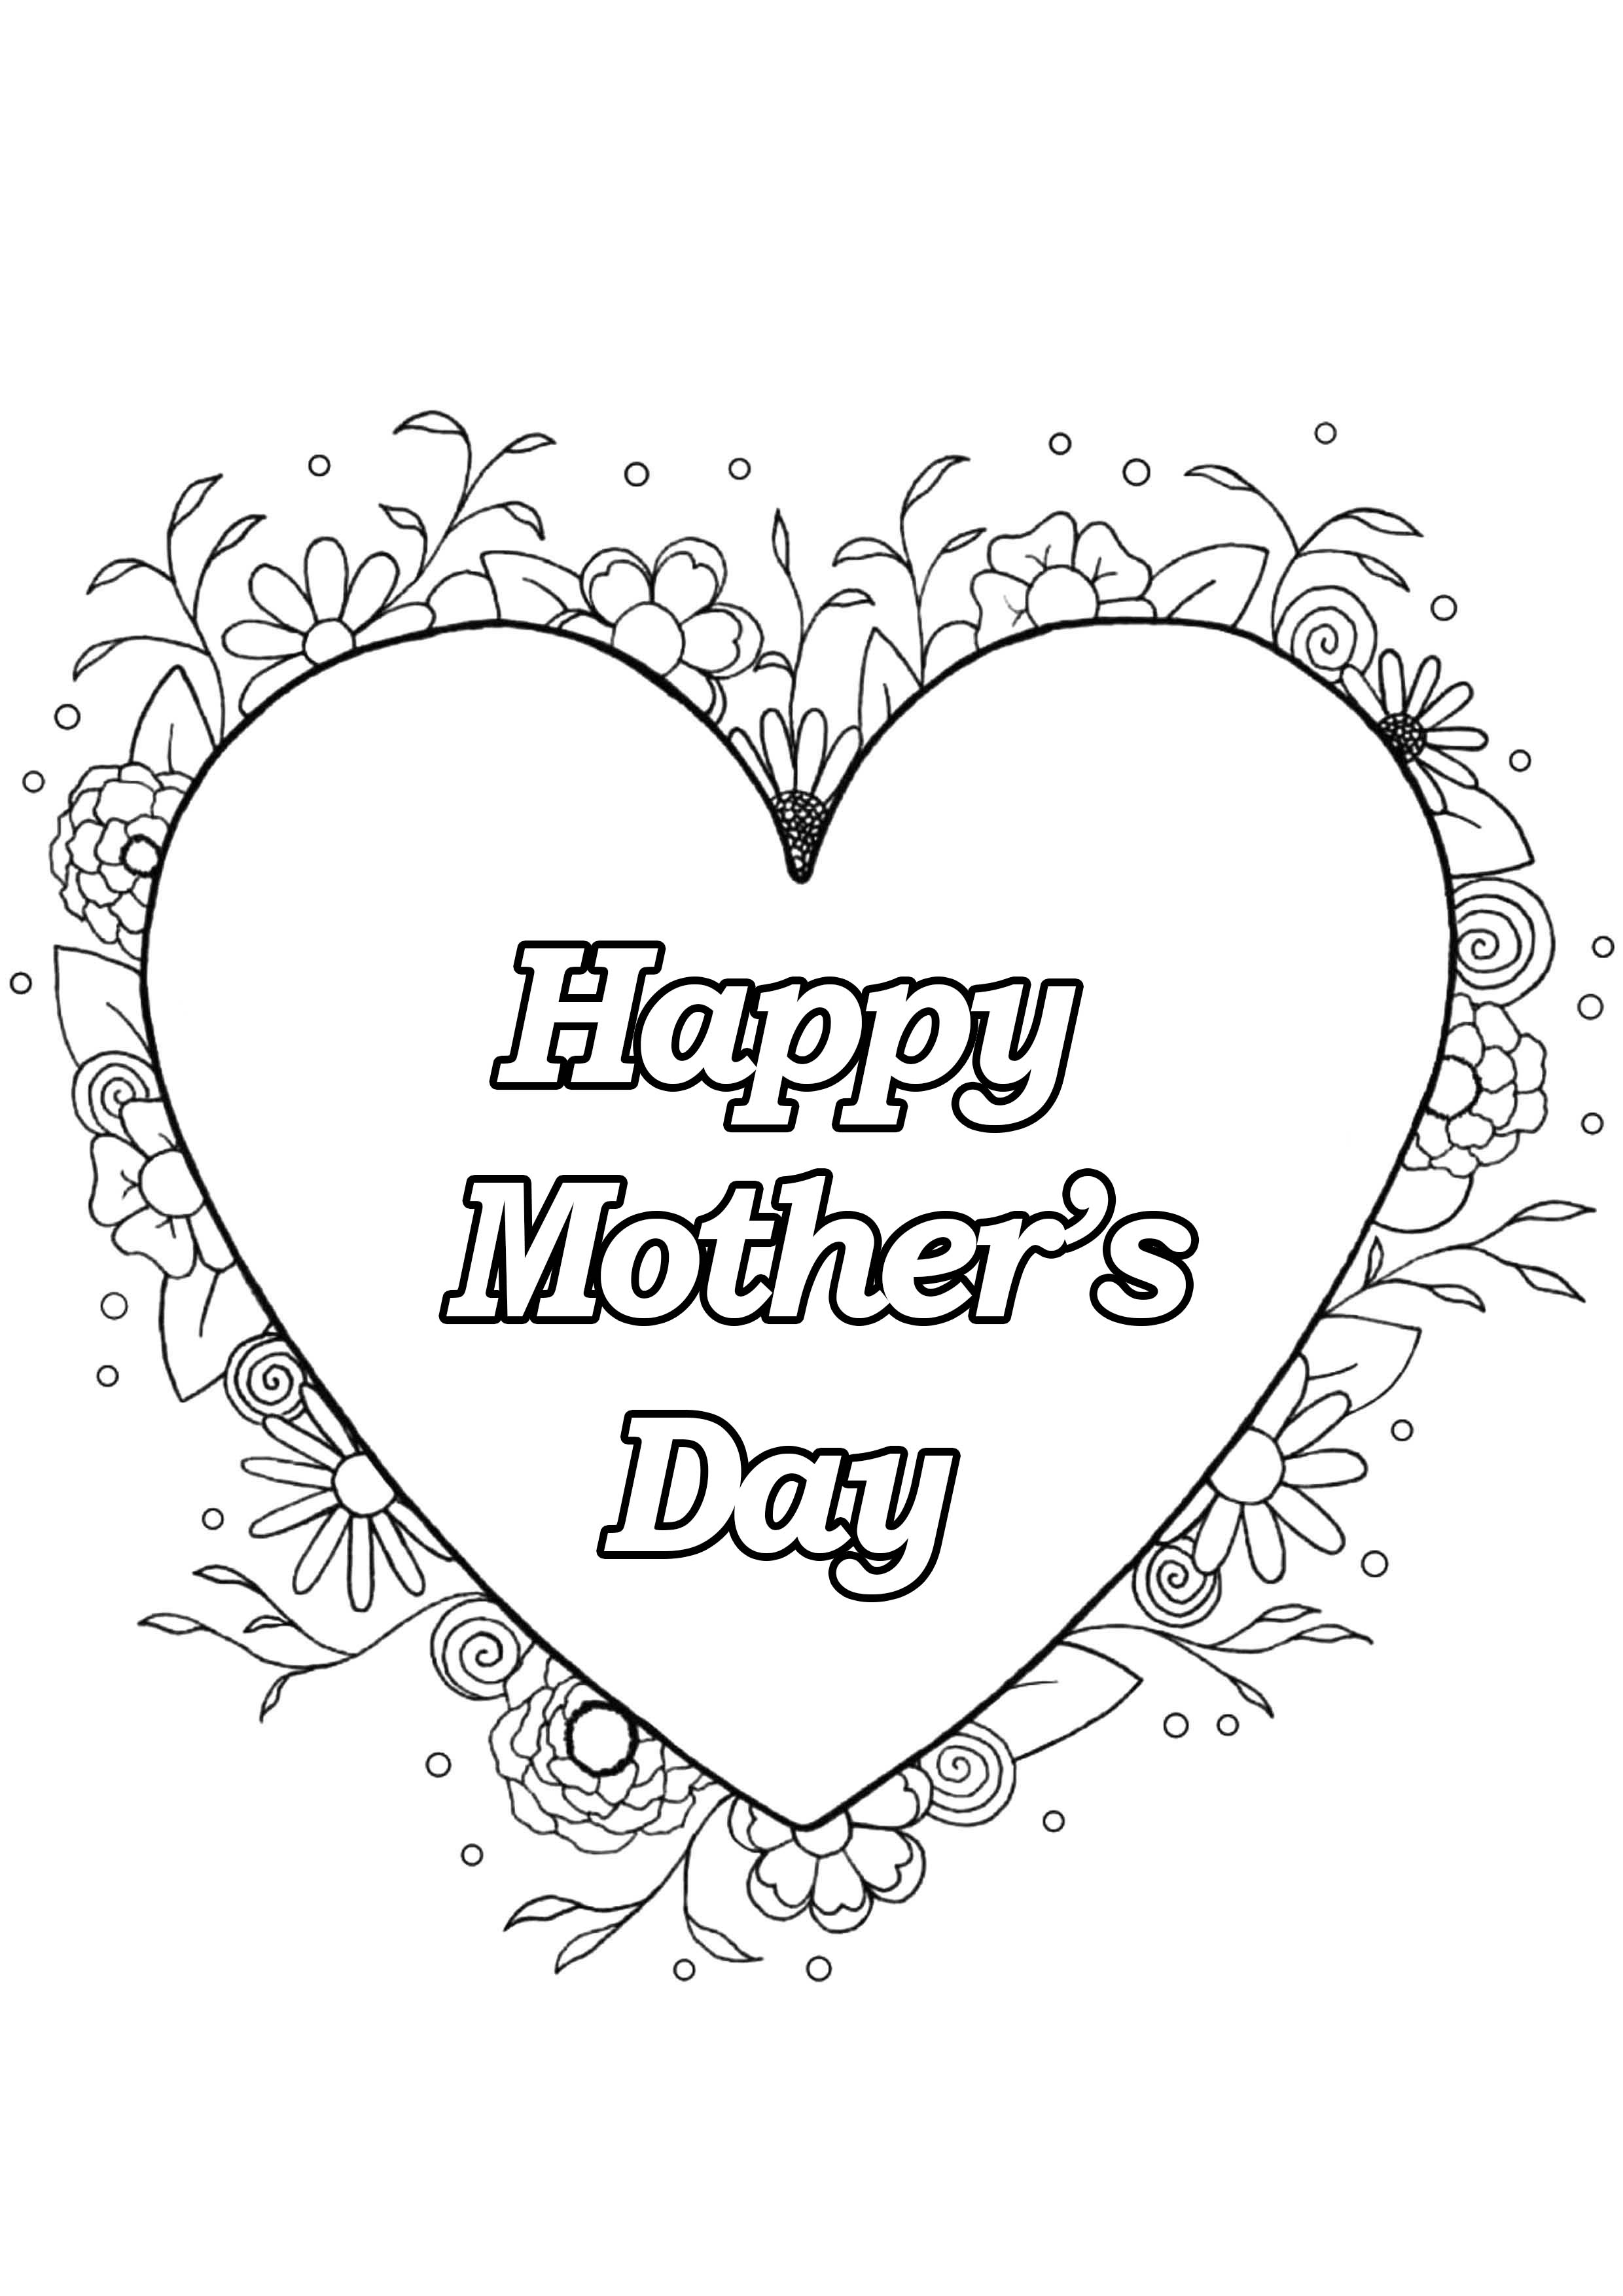 17-mother-s-day-greeting-cards-free-printable-greeting-cards